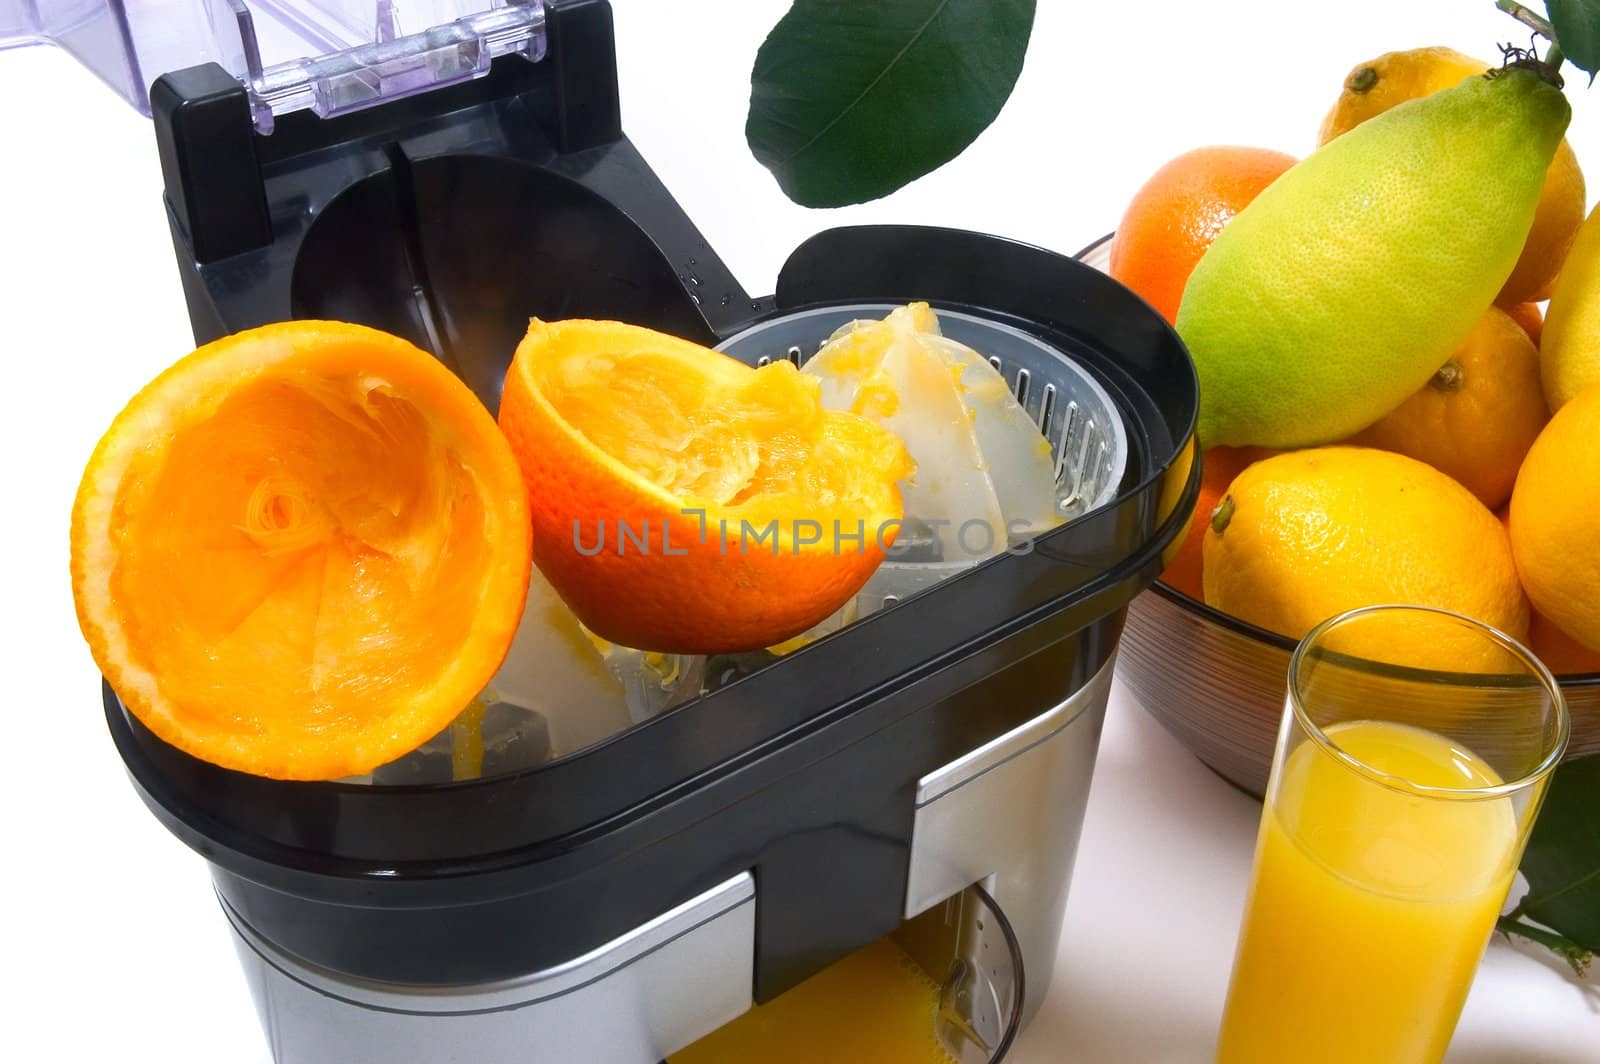 machine for pressing citrus by gillespaire